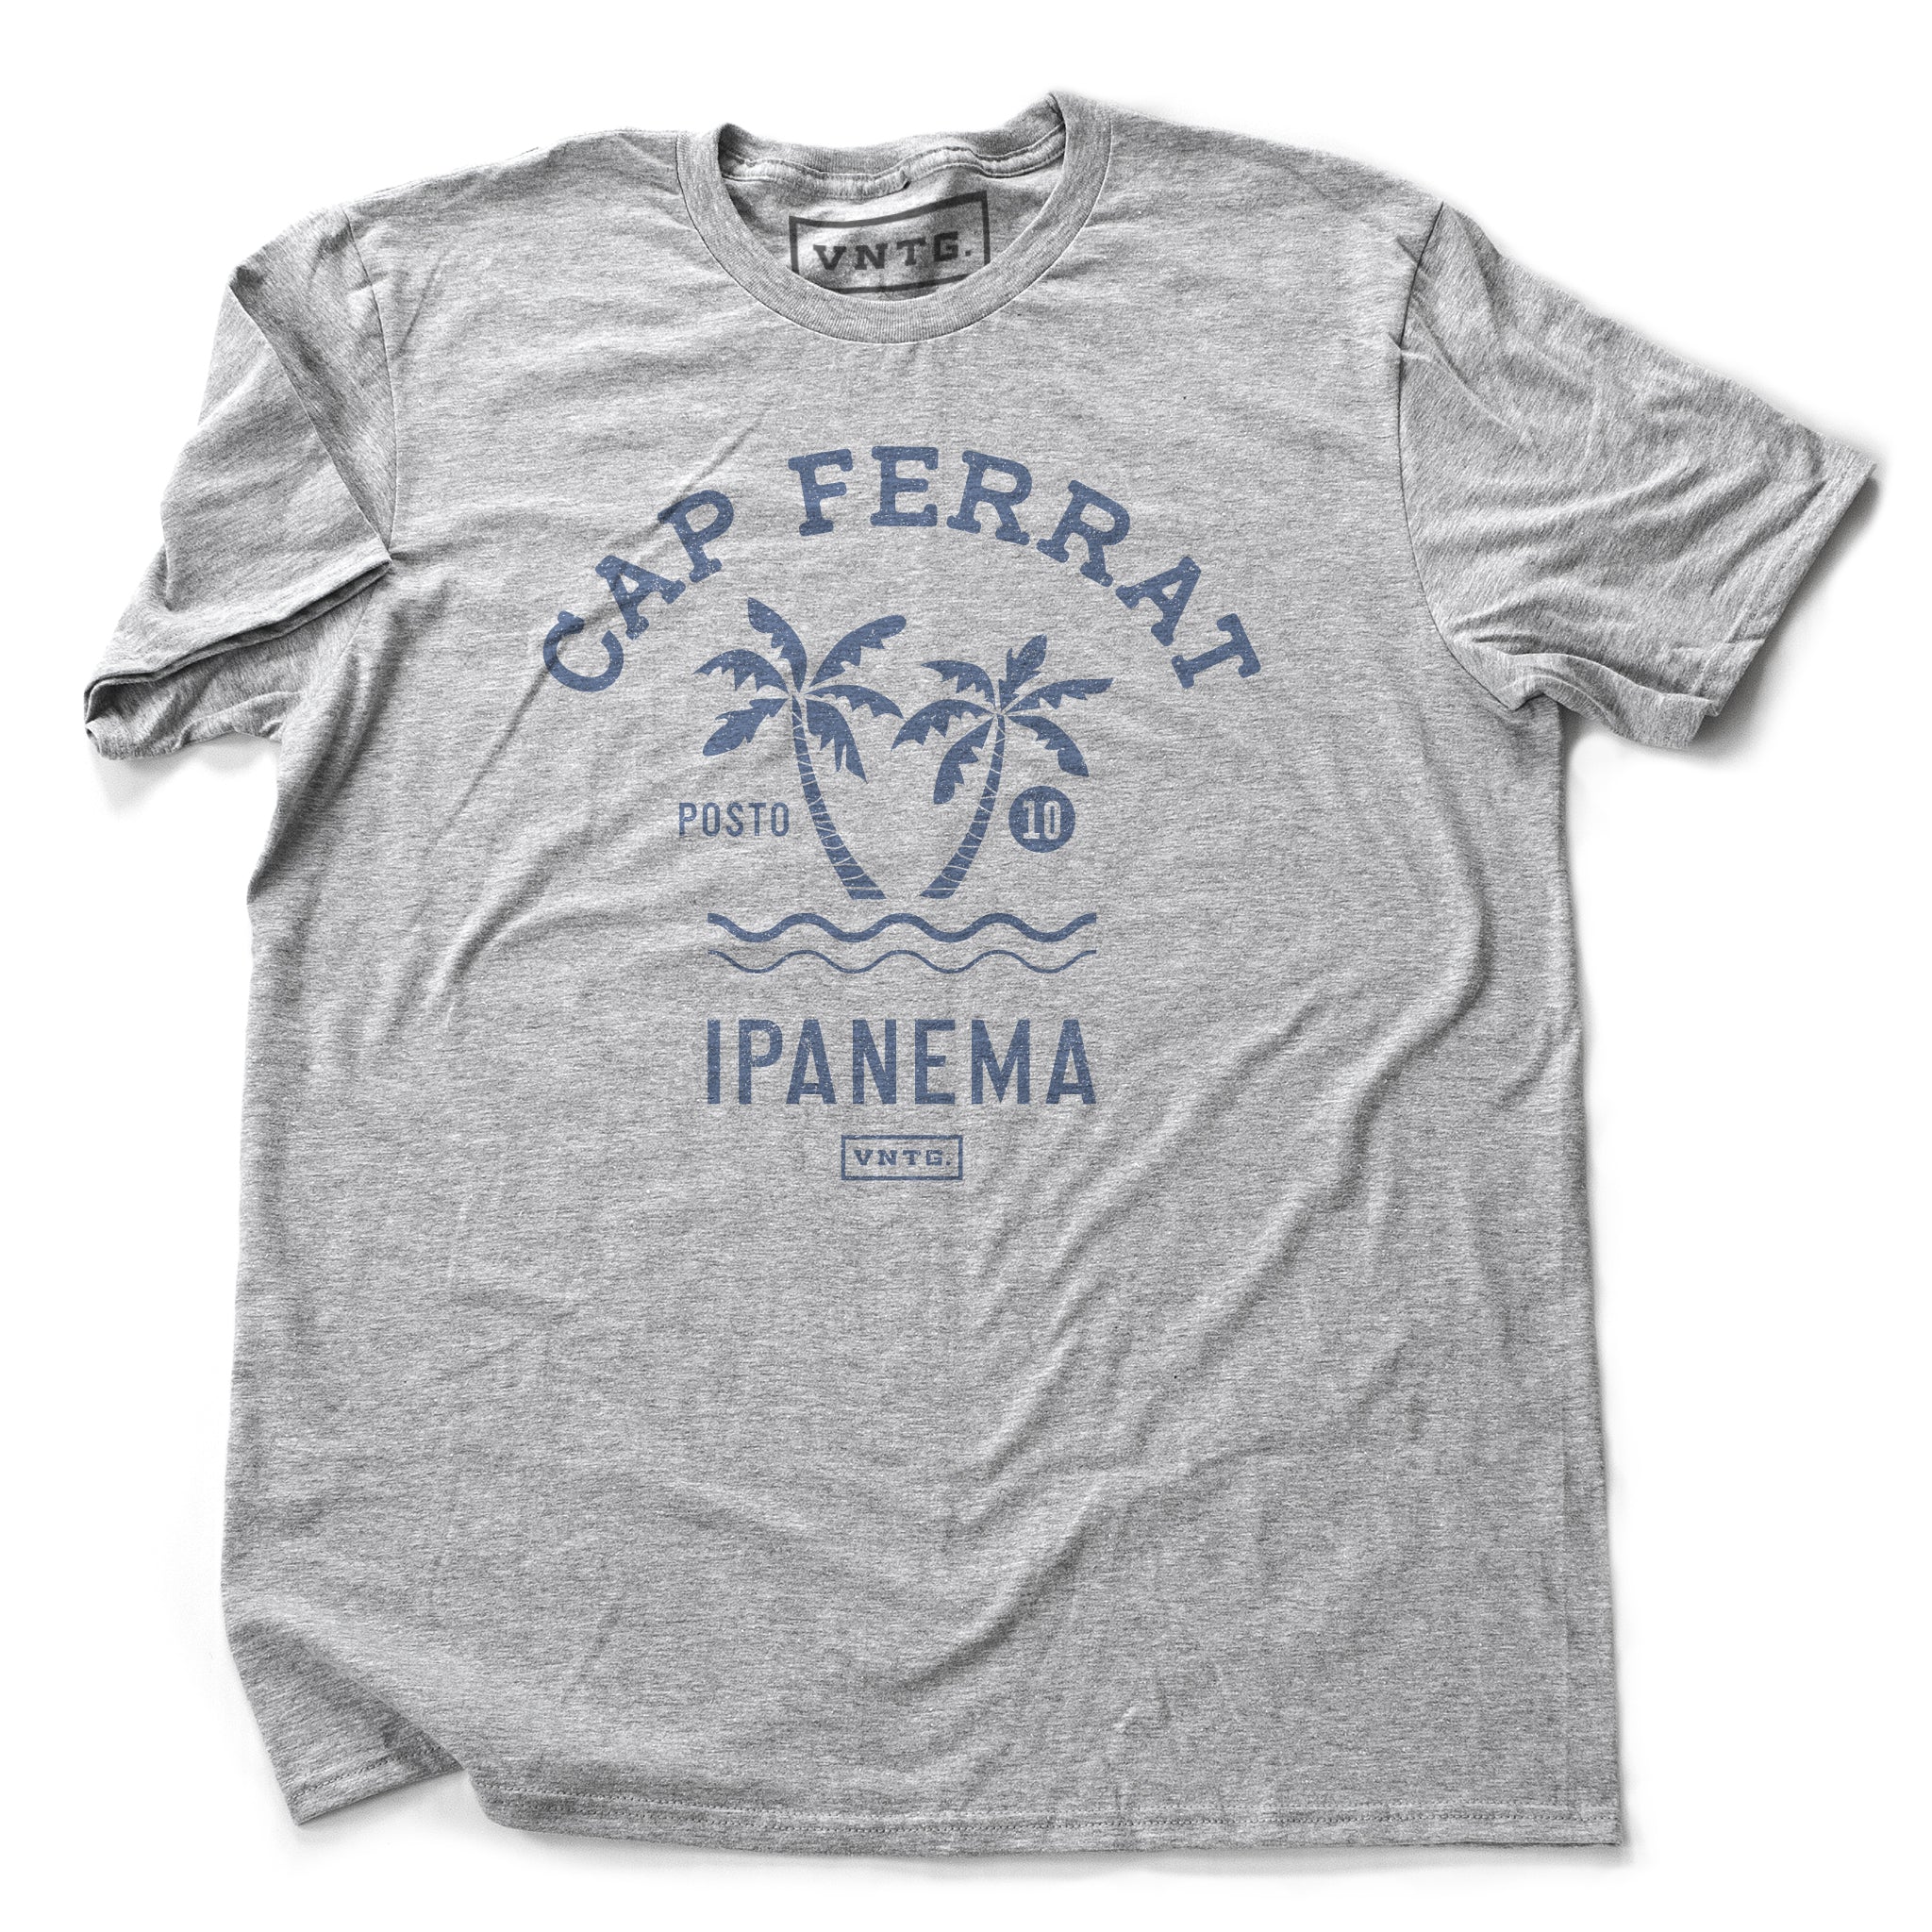 Heather gray fashion t-shirt featuring a stylish retro, vintage-inspired graphic of two palm trees against the waves, and the words Cap Ferrat, Ipanema, a popular beach spot in Rio de Janeiro, Brazil. From wolfsaint.net